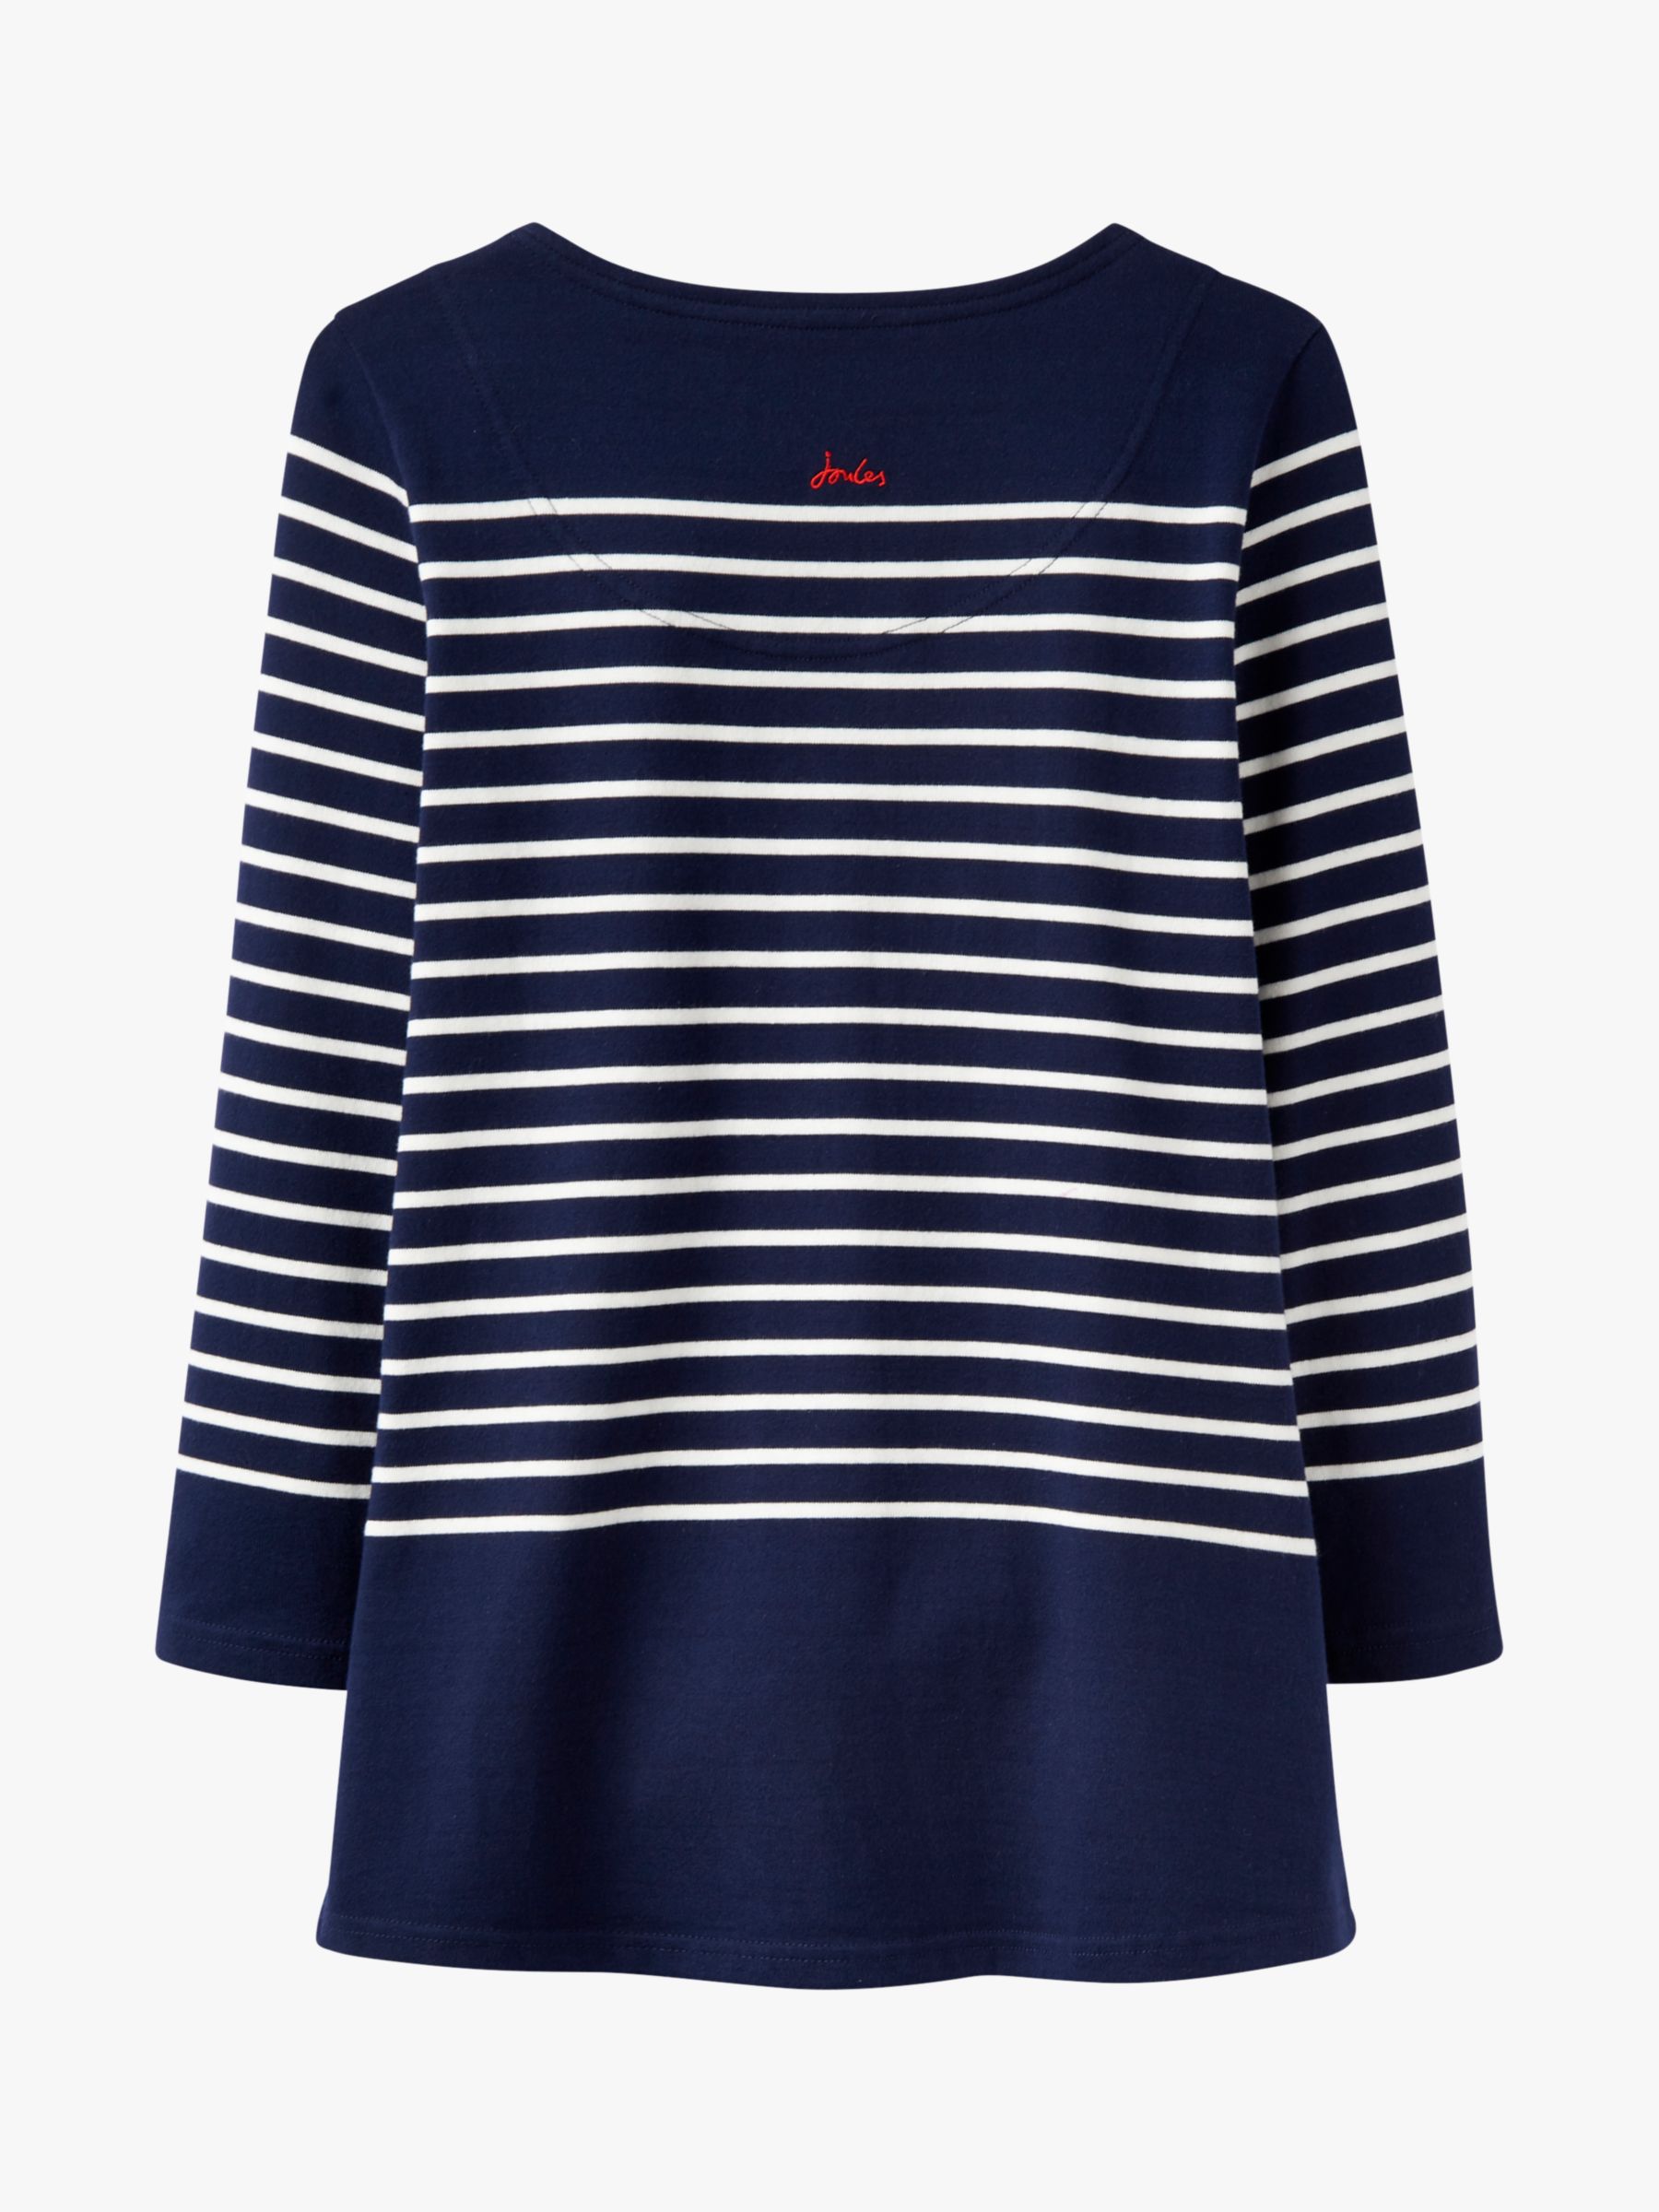 Joules Harbour Embroidered Jersey Top, Navy/Cream